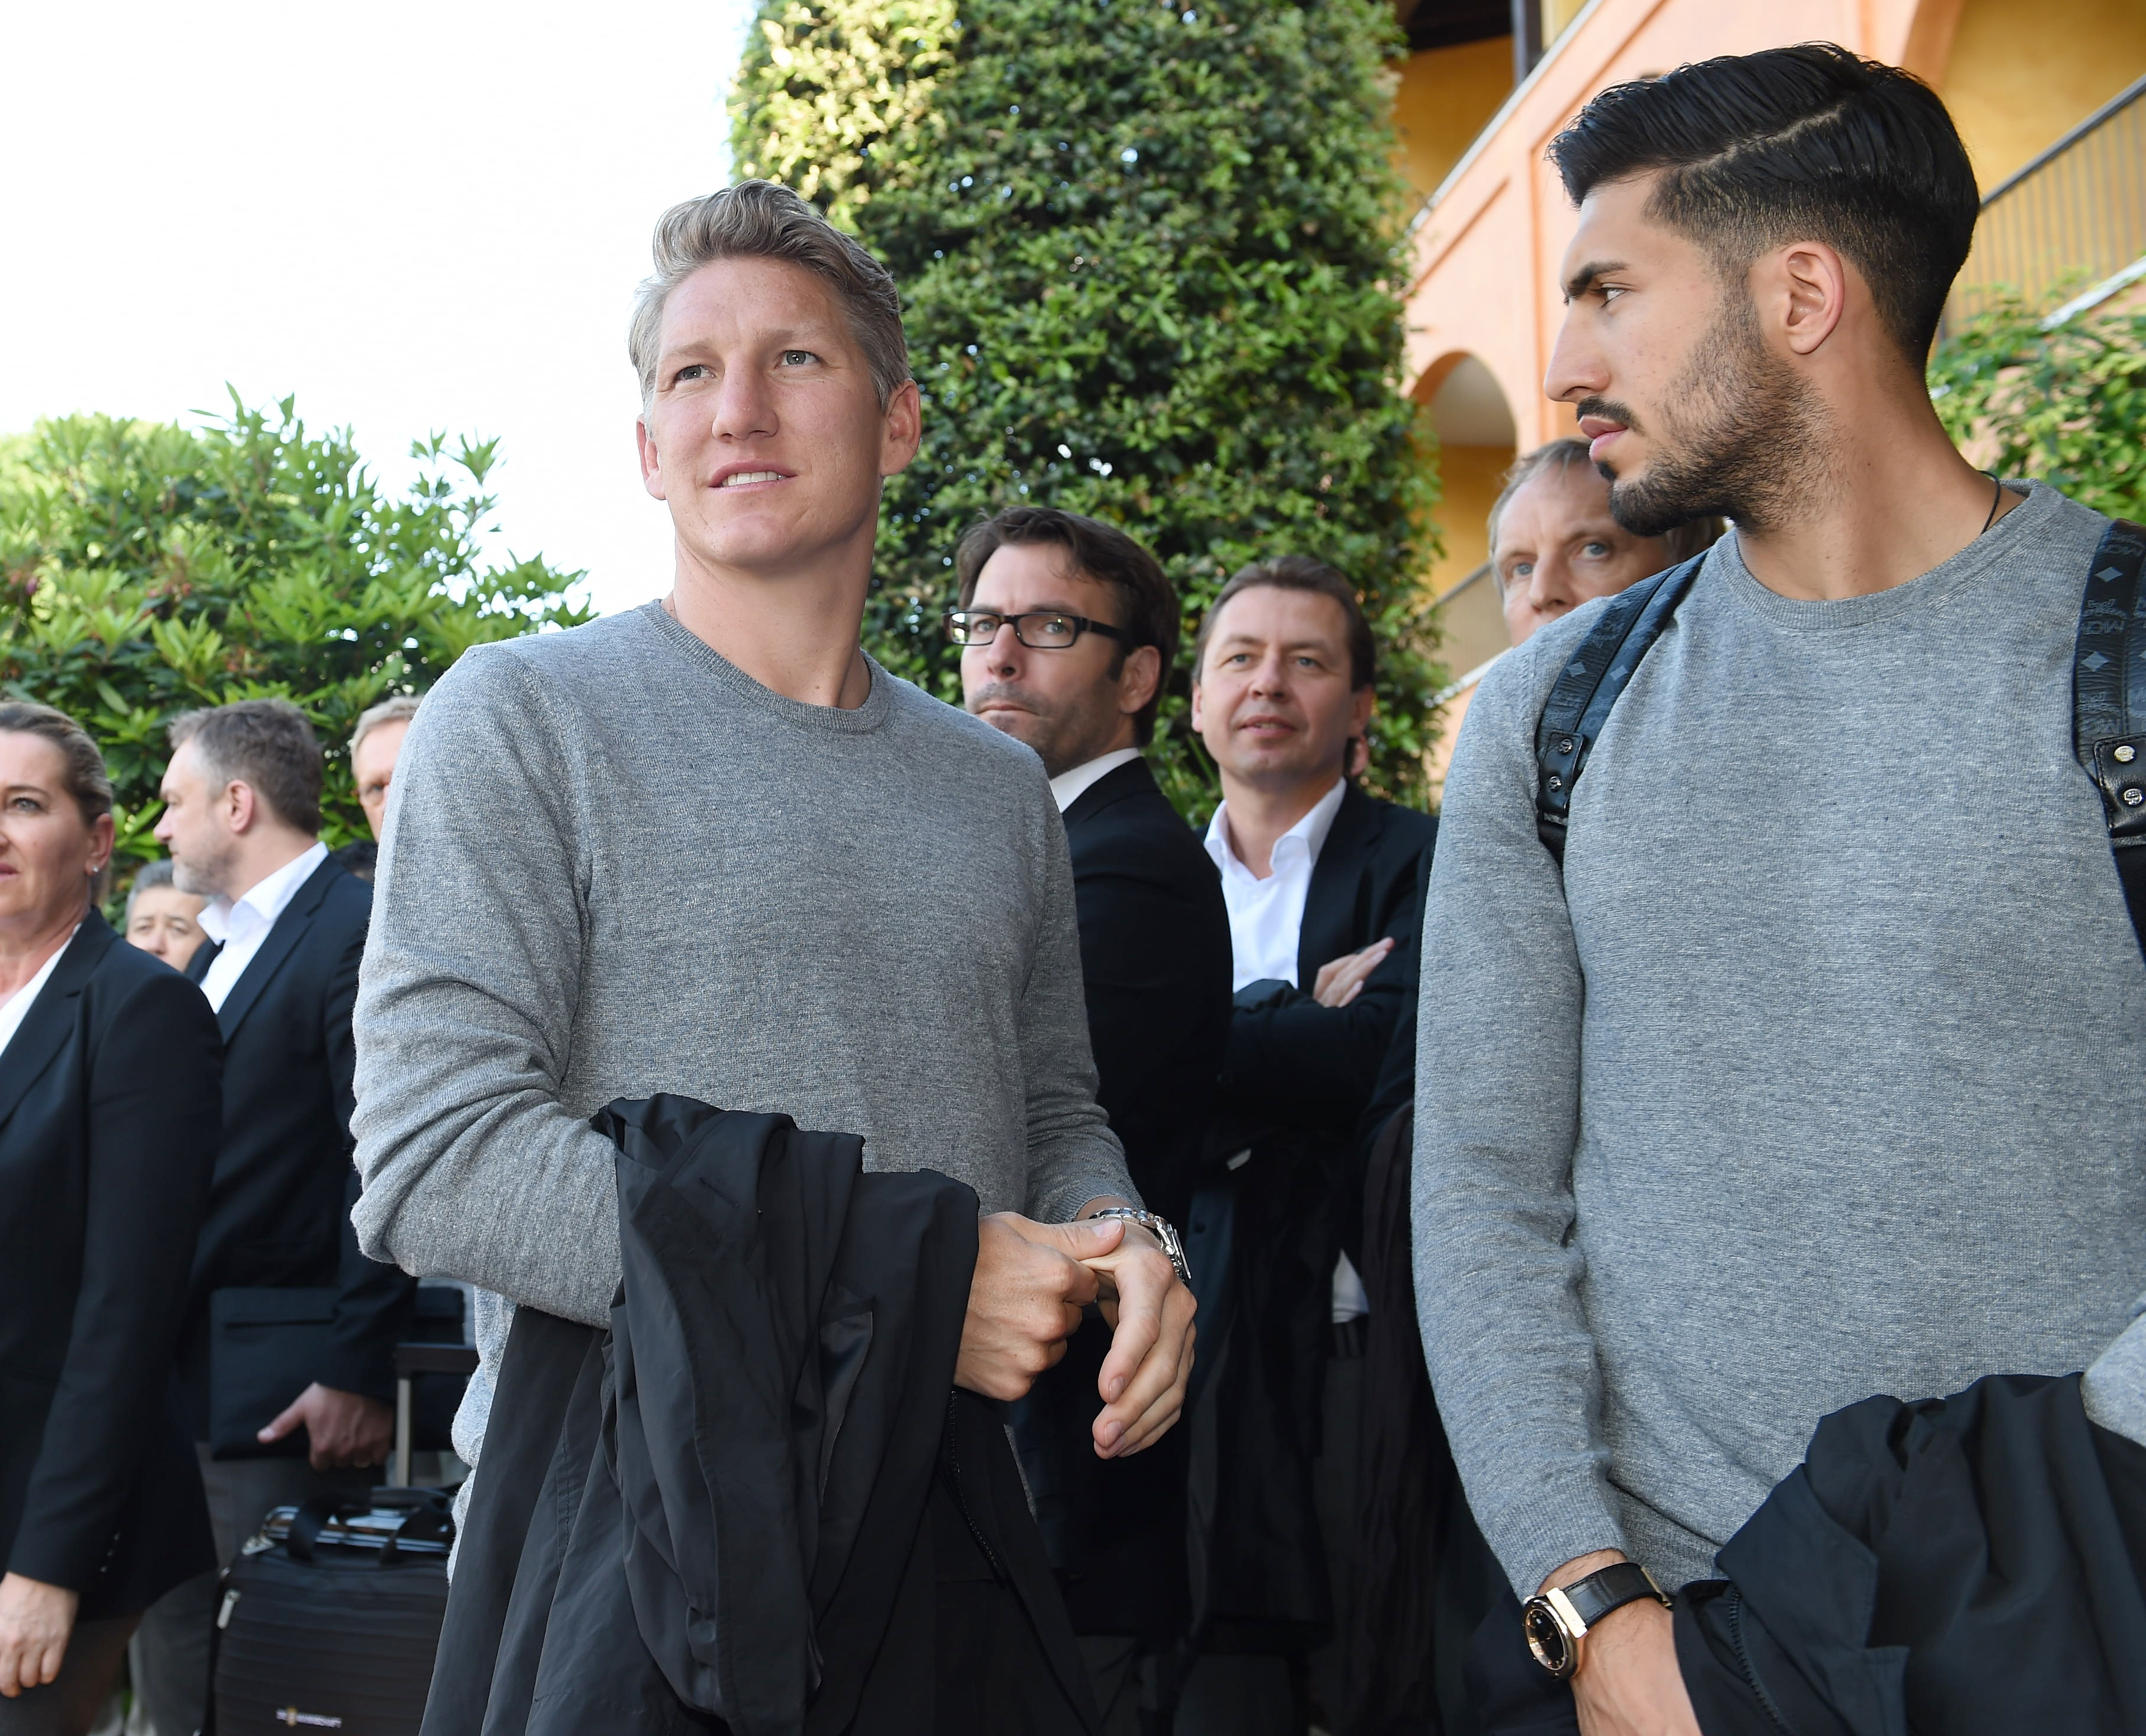 ASCONA, SWITZERLAND - MAY 24:  Bastian Schweinsteiger and Emre Can of Germany arrives with the German national football team, ahead their EURO 2016 training camp, at Hotel Giardino on May 24, 2016 in Ascona, Switzerland.  (Photo by Markus Gilliar-Pool/Bongarts/Getty Images)